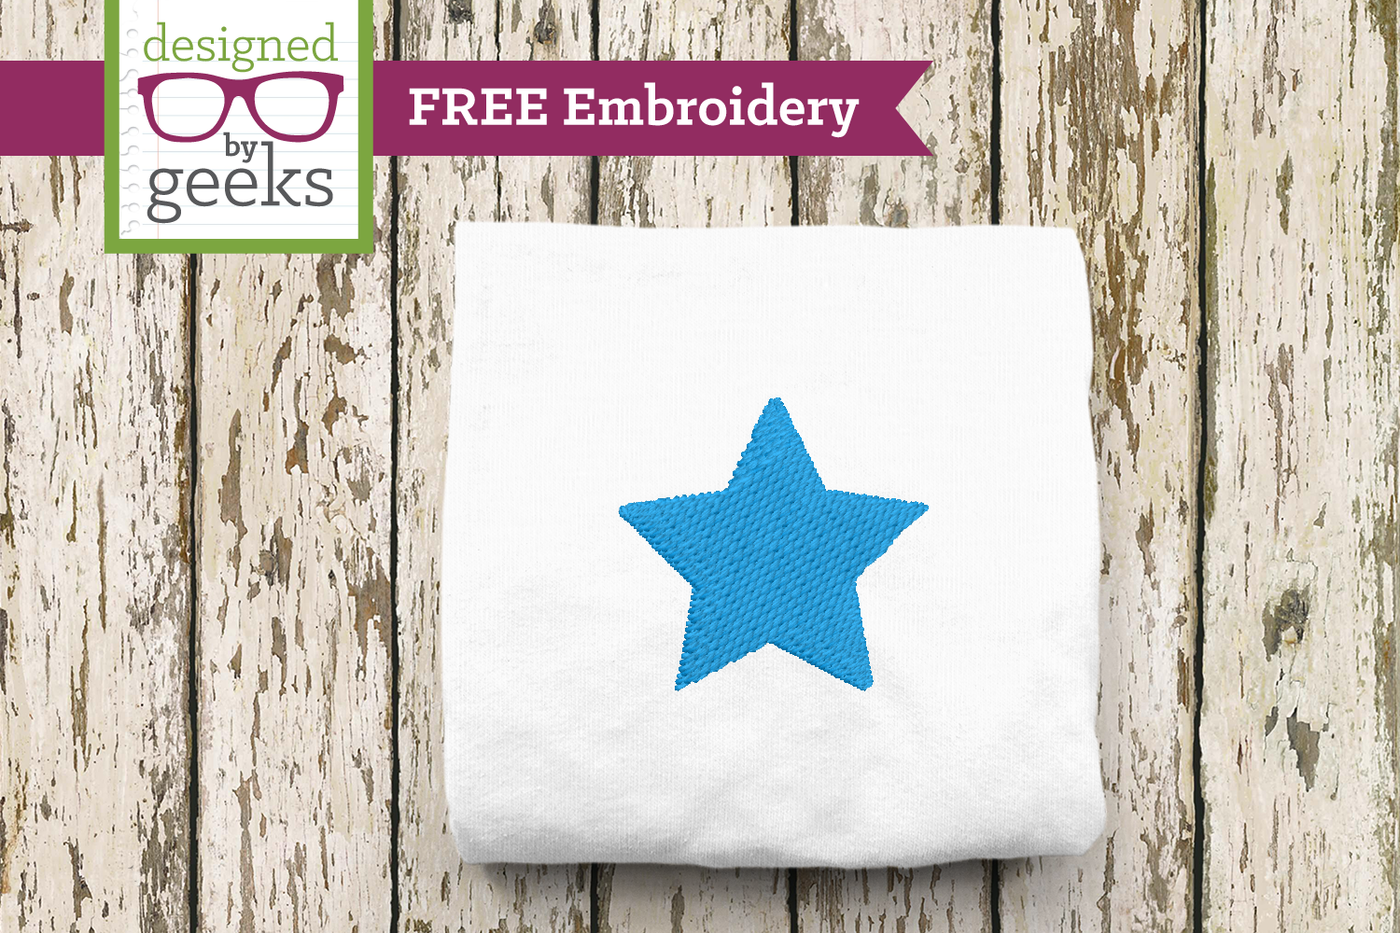 Single embroidered star free design